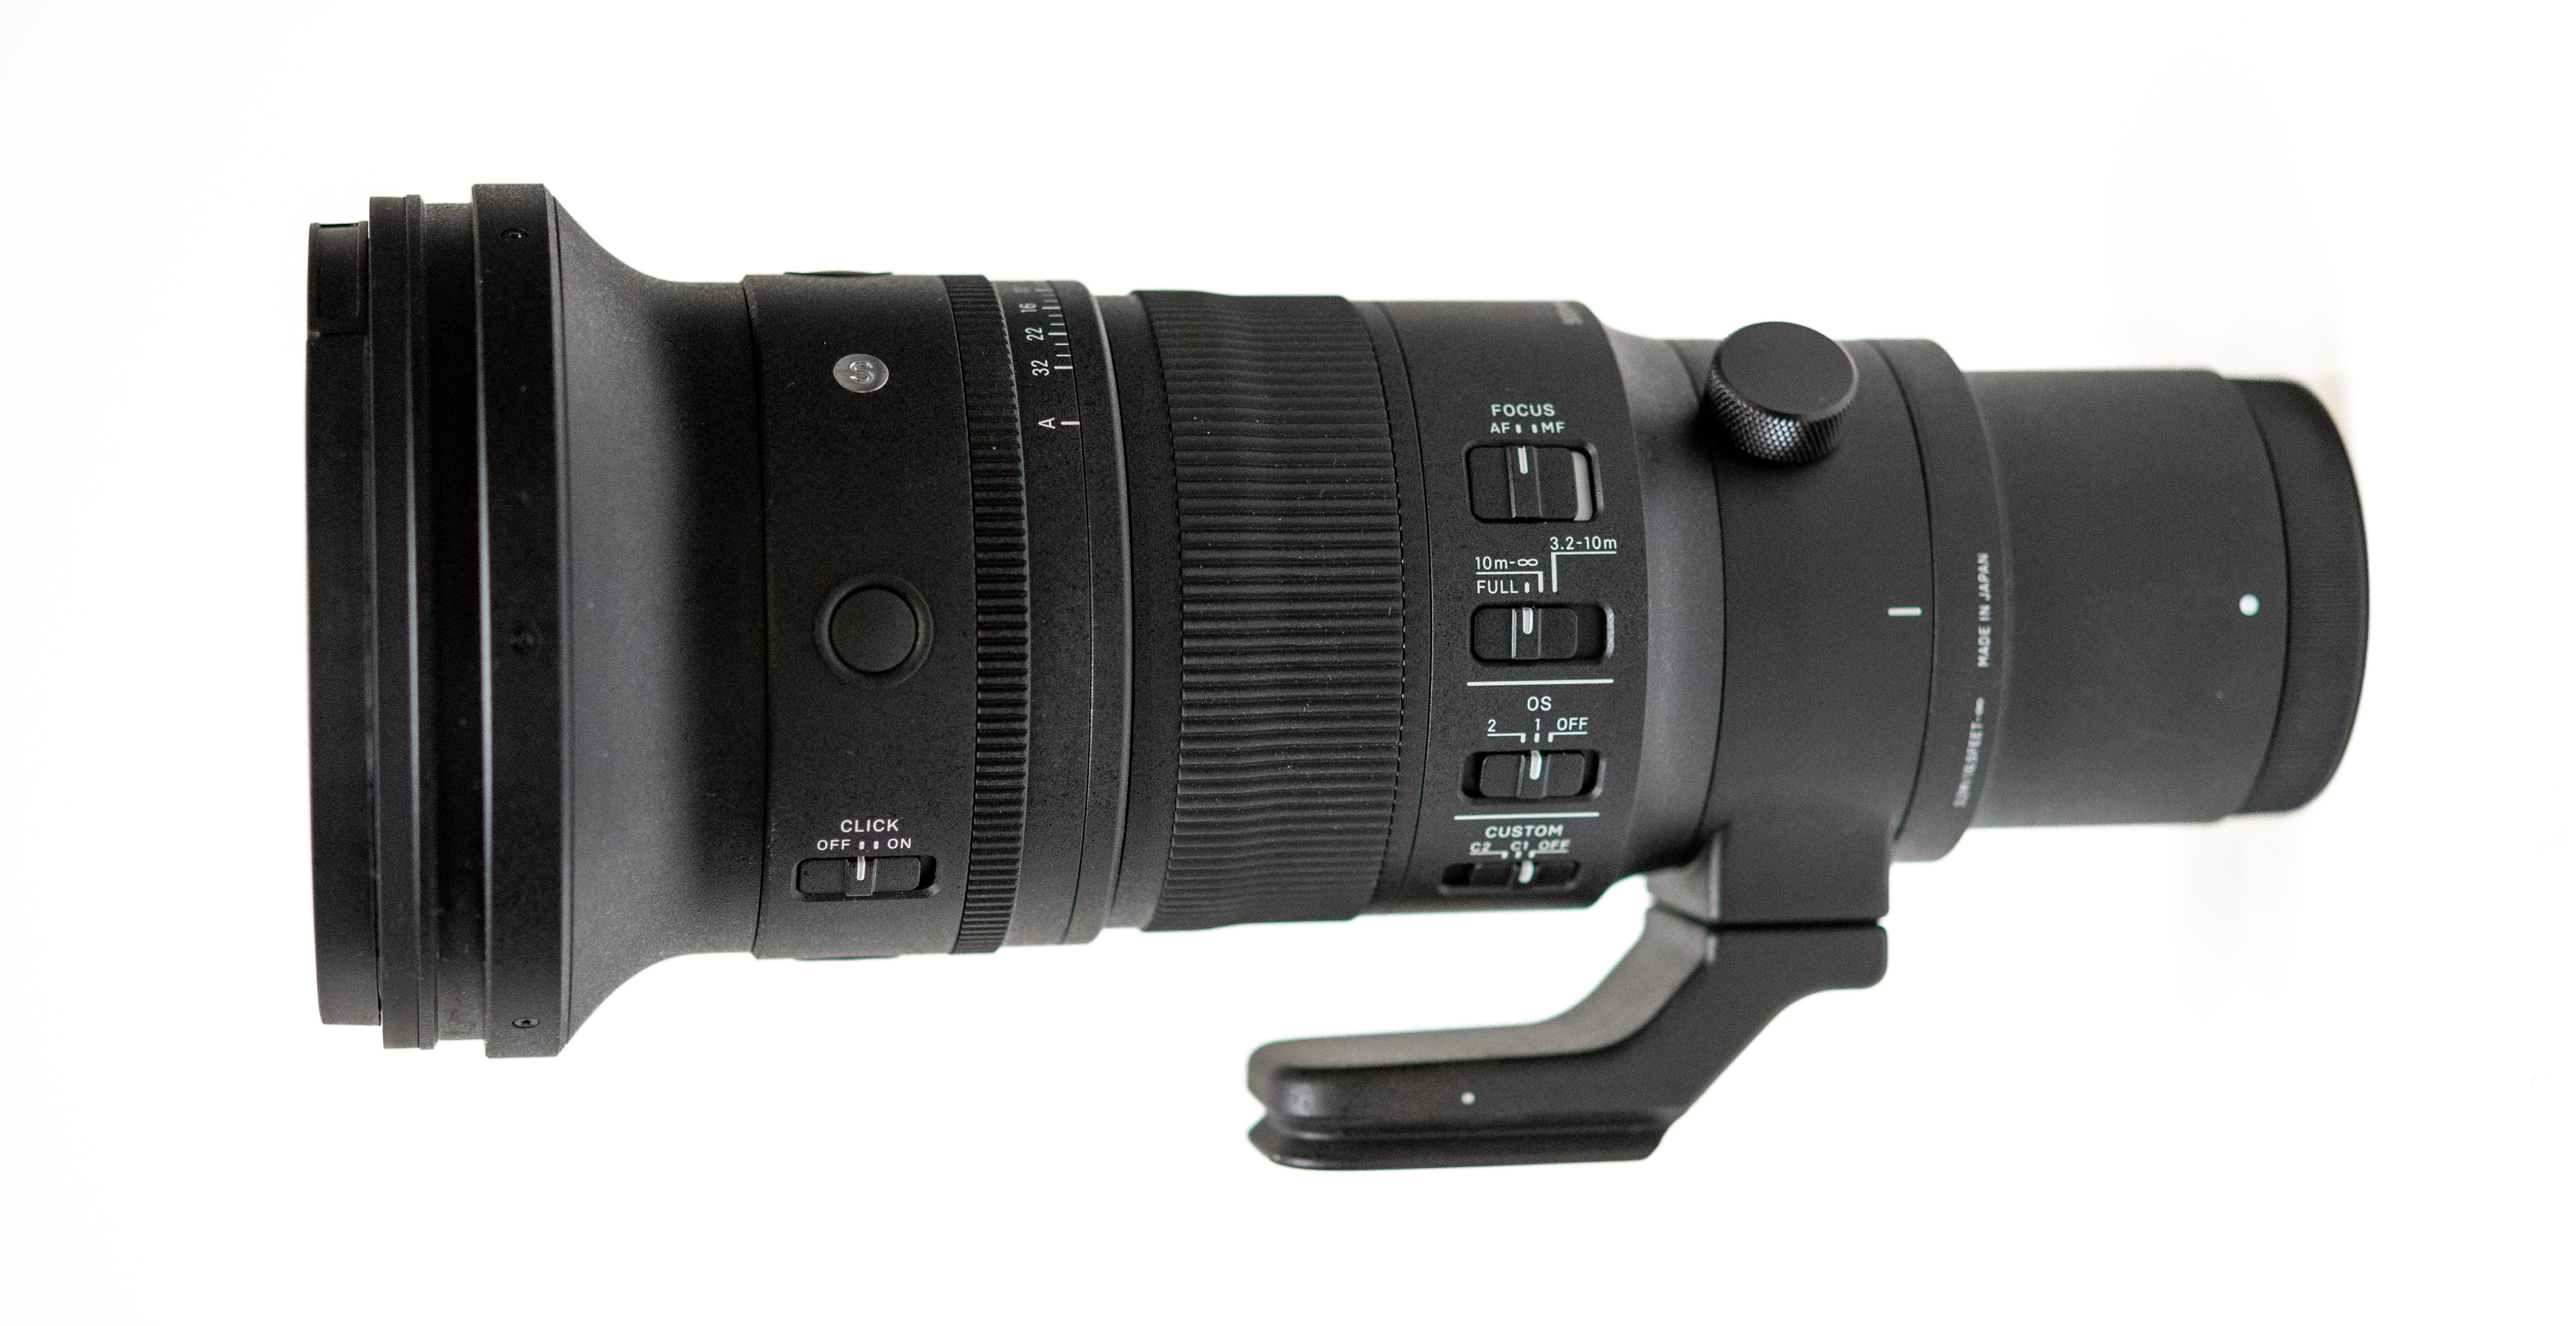 Reviewing The SIGMA 500mm F5.6 DG DN OS | Sports Lens